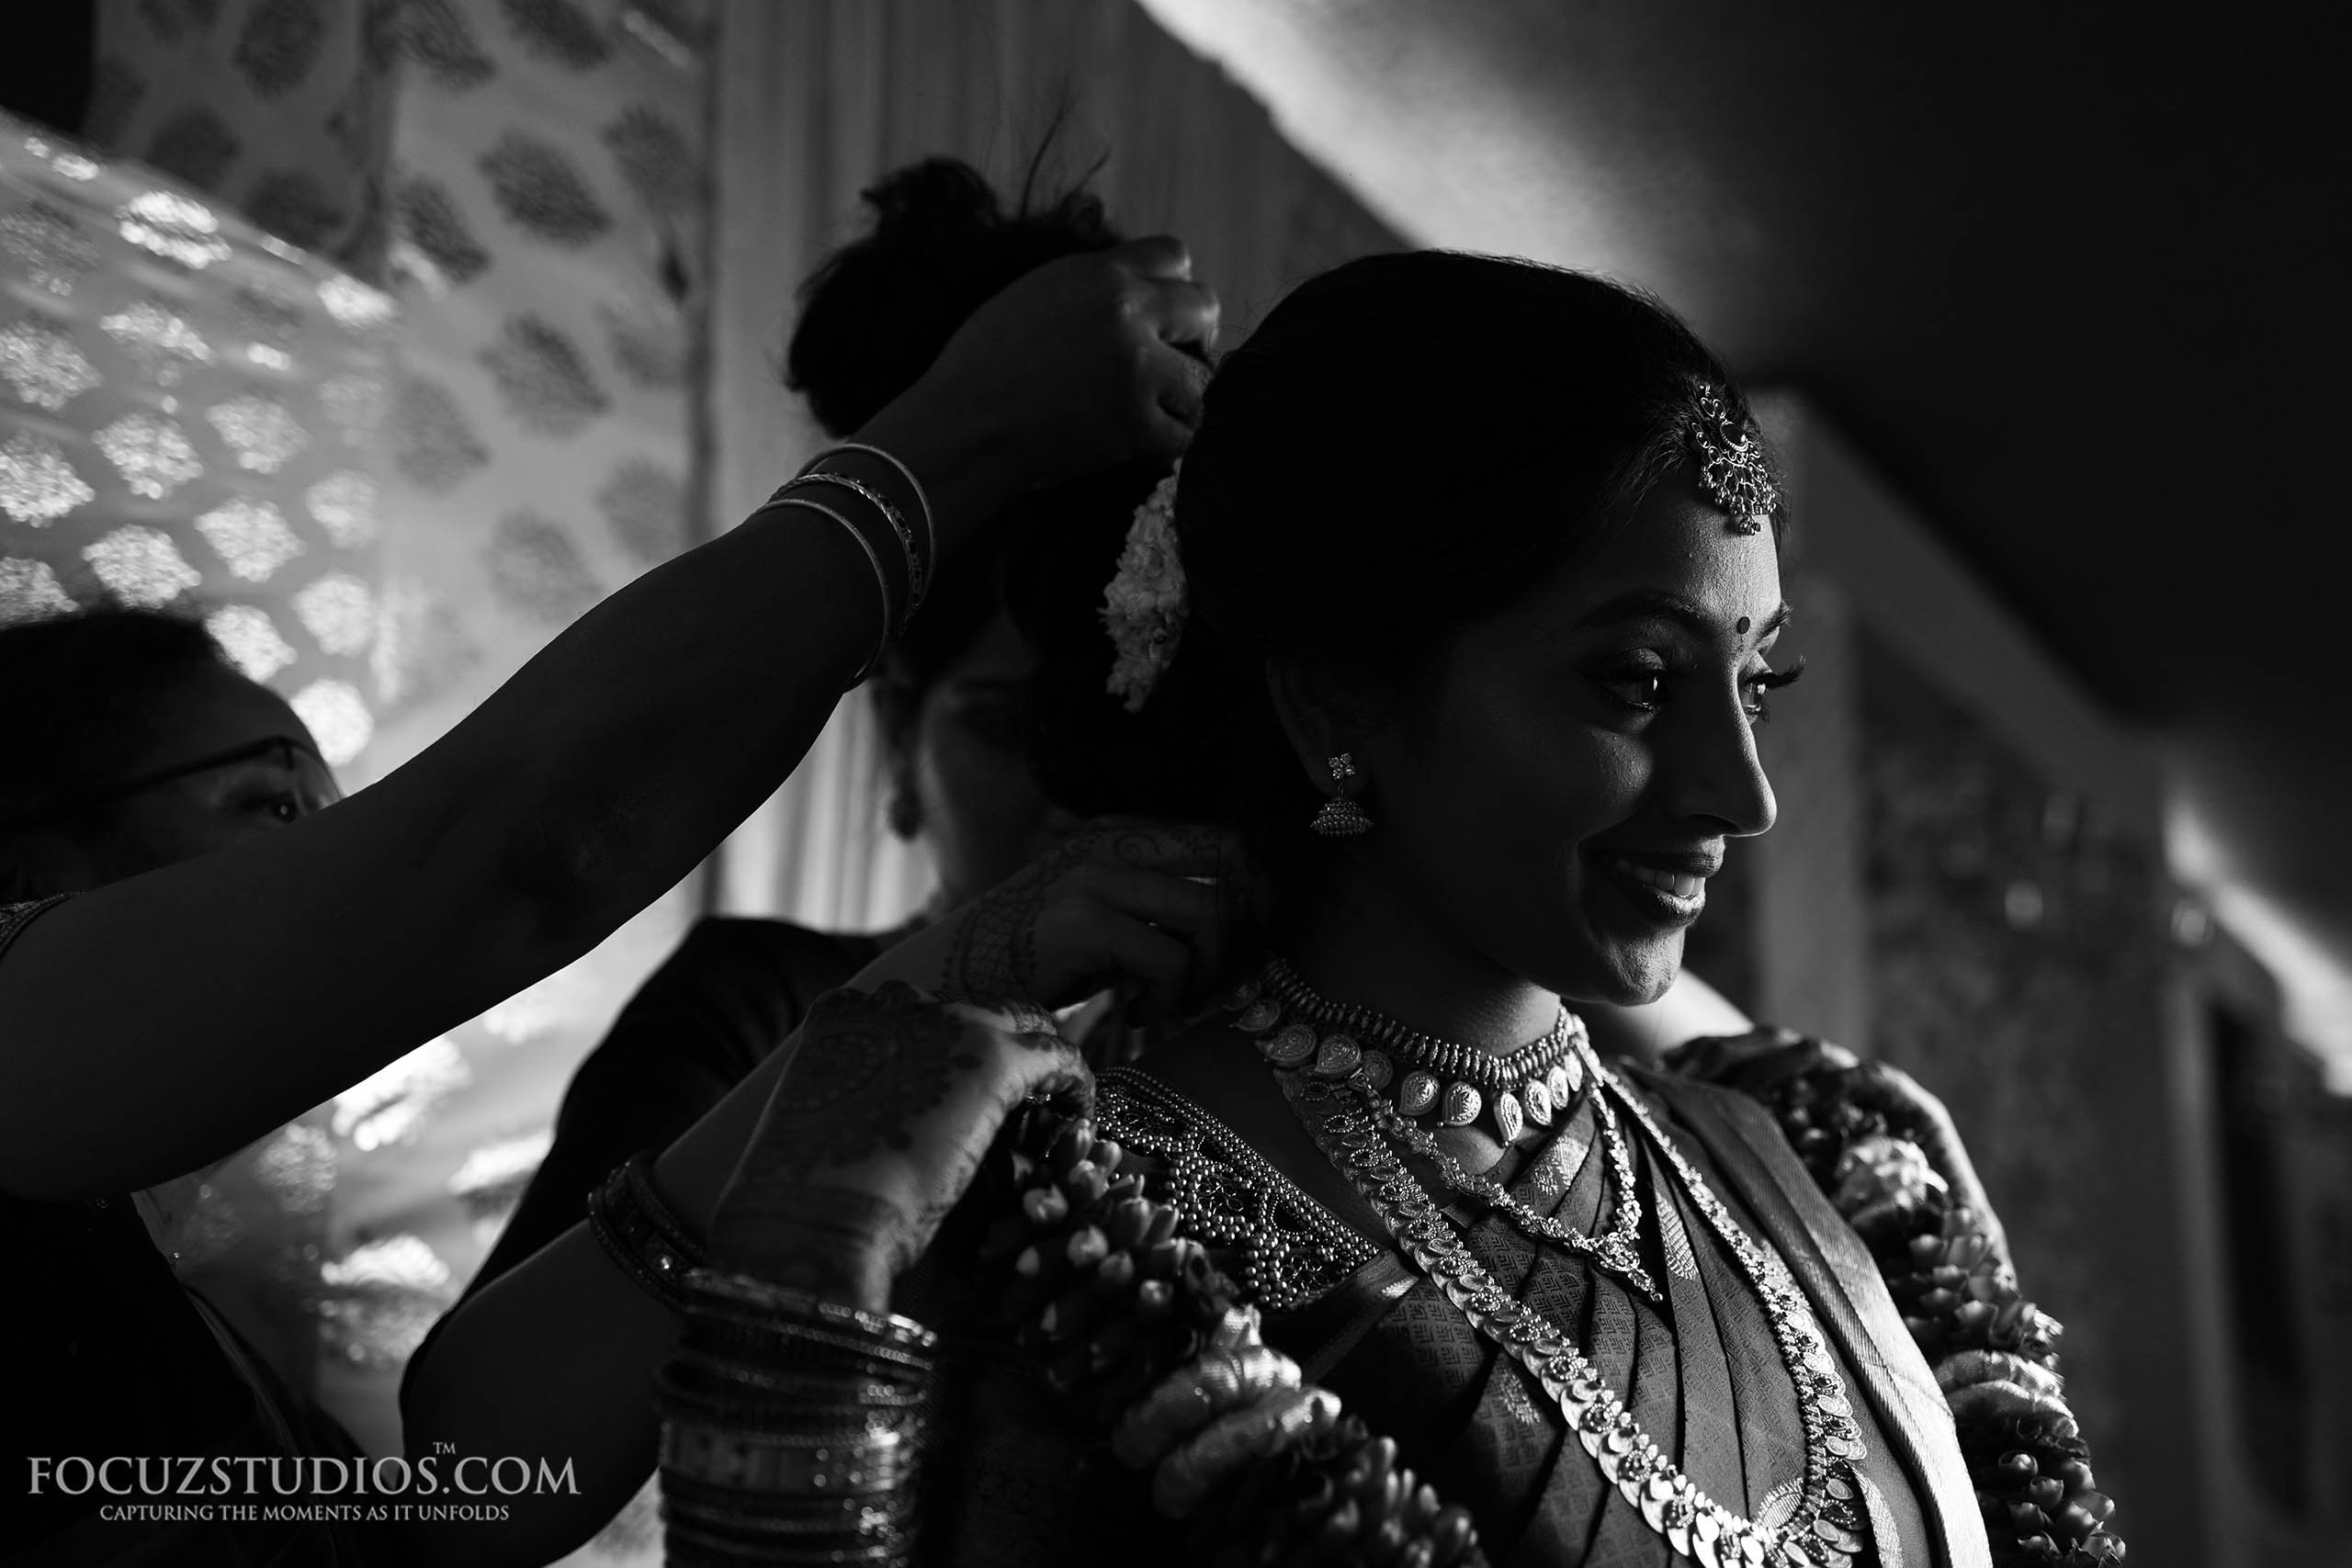 south-indian-bride-getting-ready-candid-wedding-photography-8